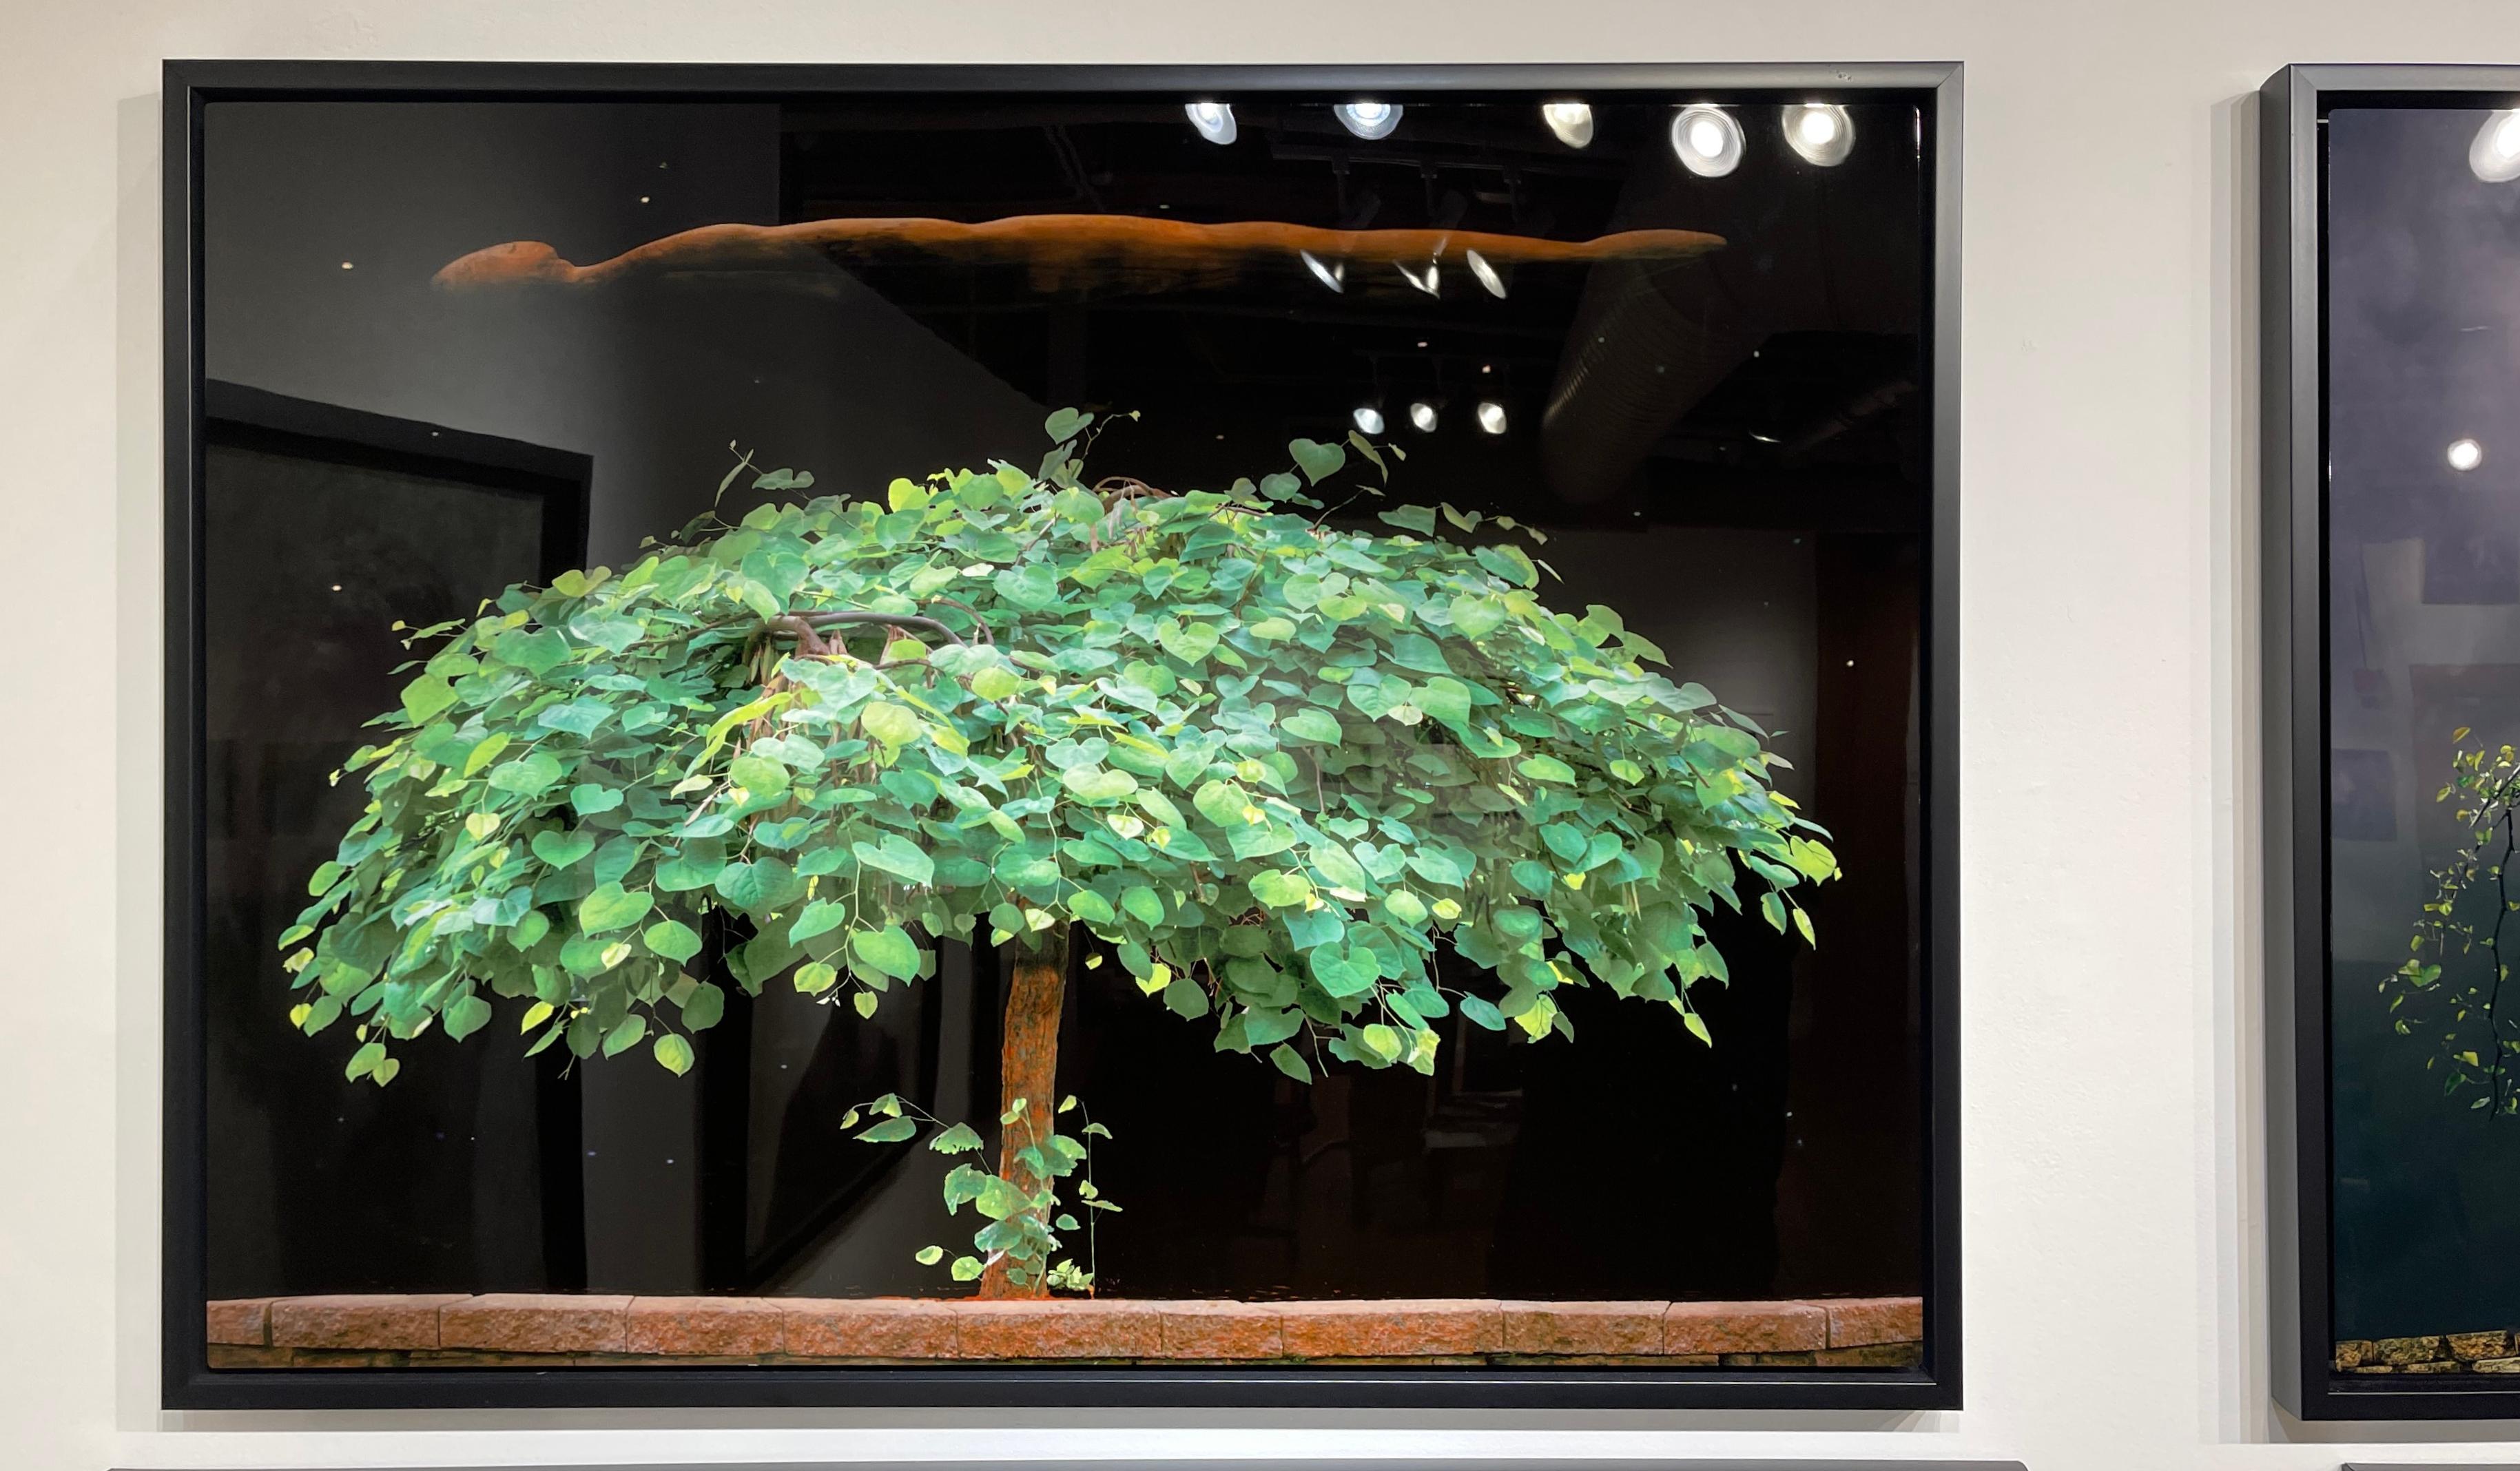 The Night Sky - Aluminum Mounted Glossy Color Photo with Bright Green Tree - Photograph by Mary Block